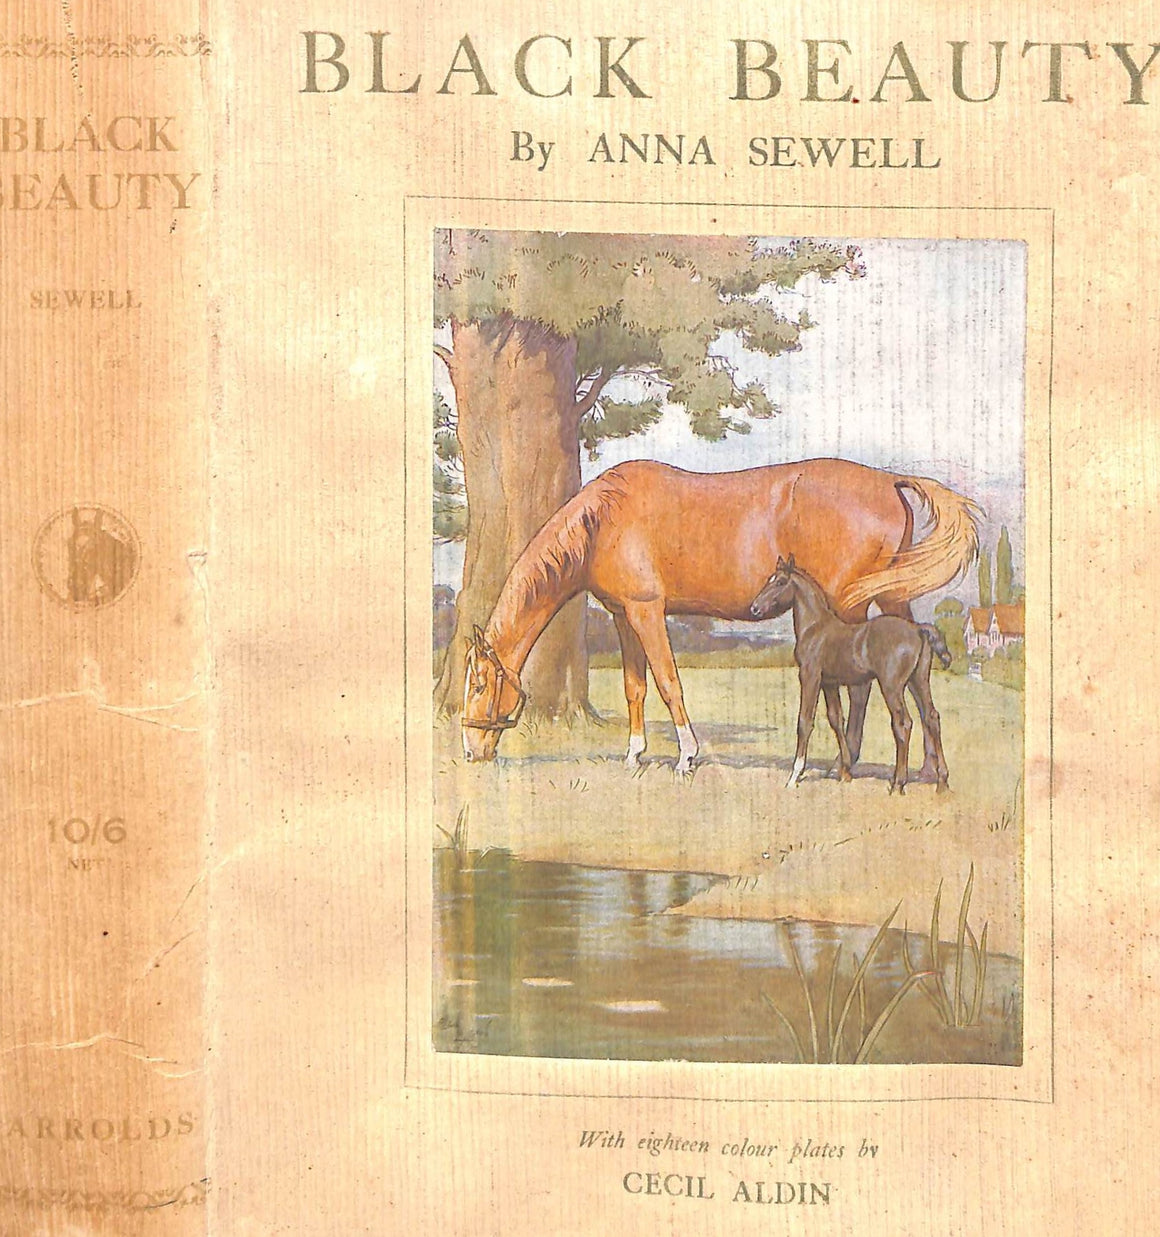 "Black Beauty: The Biography Of A Horse" SEWELL, Anna